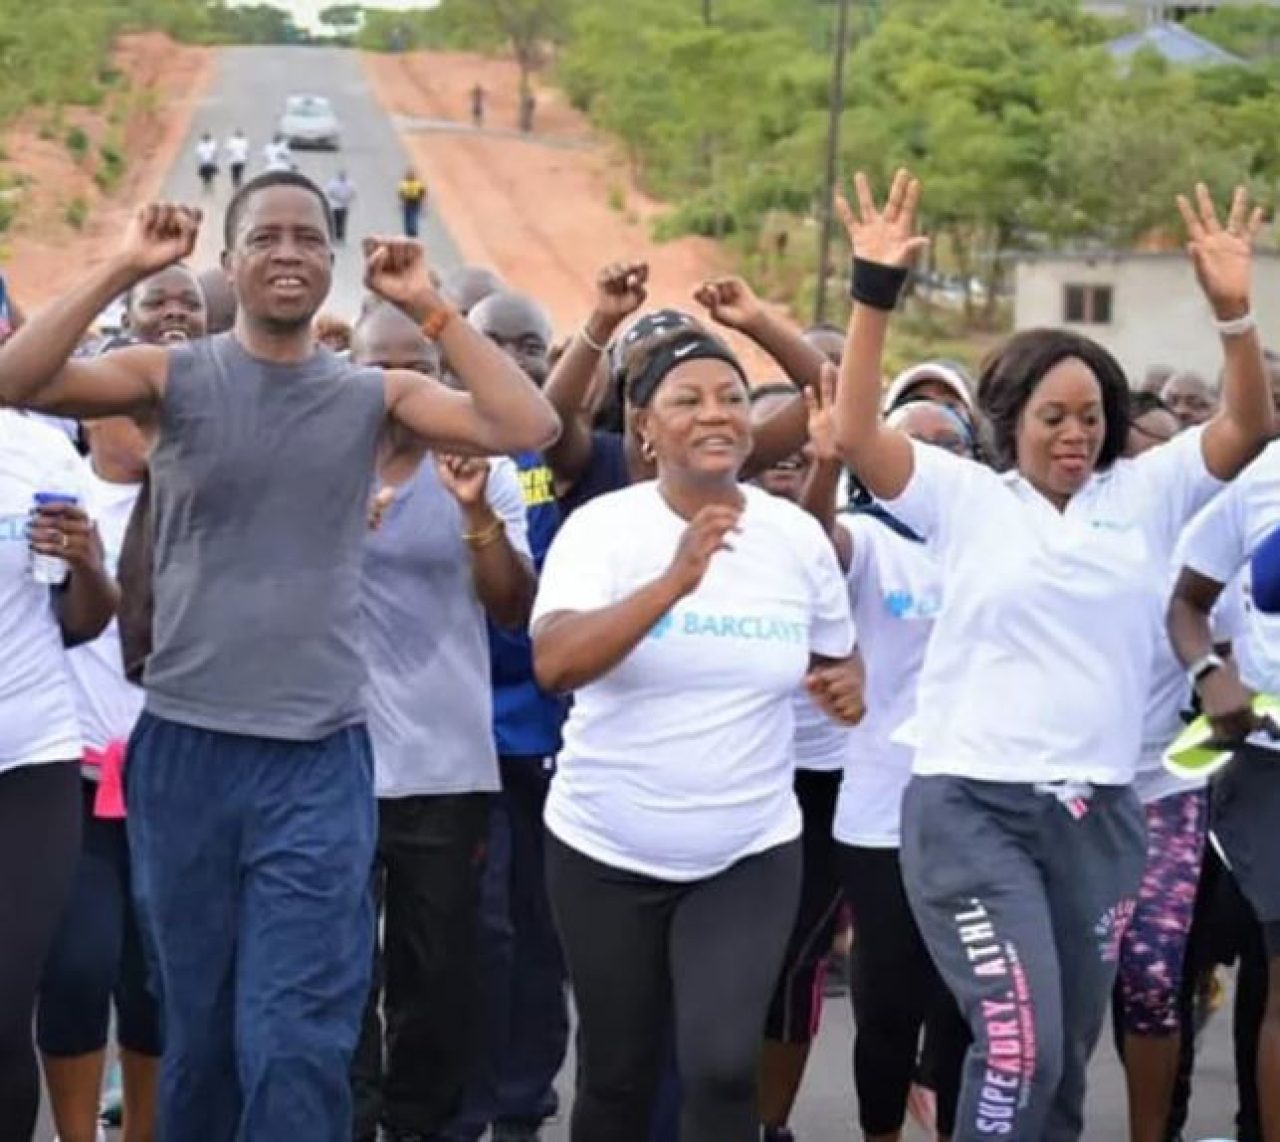 'Political' Jogging Banned for Former President Edgar Lungu. Afro News Wire